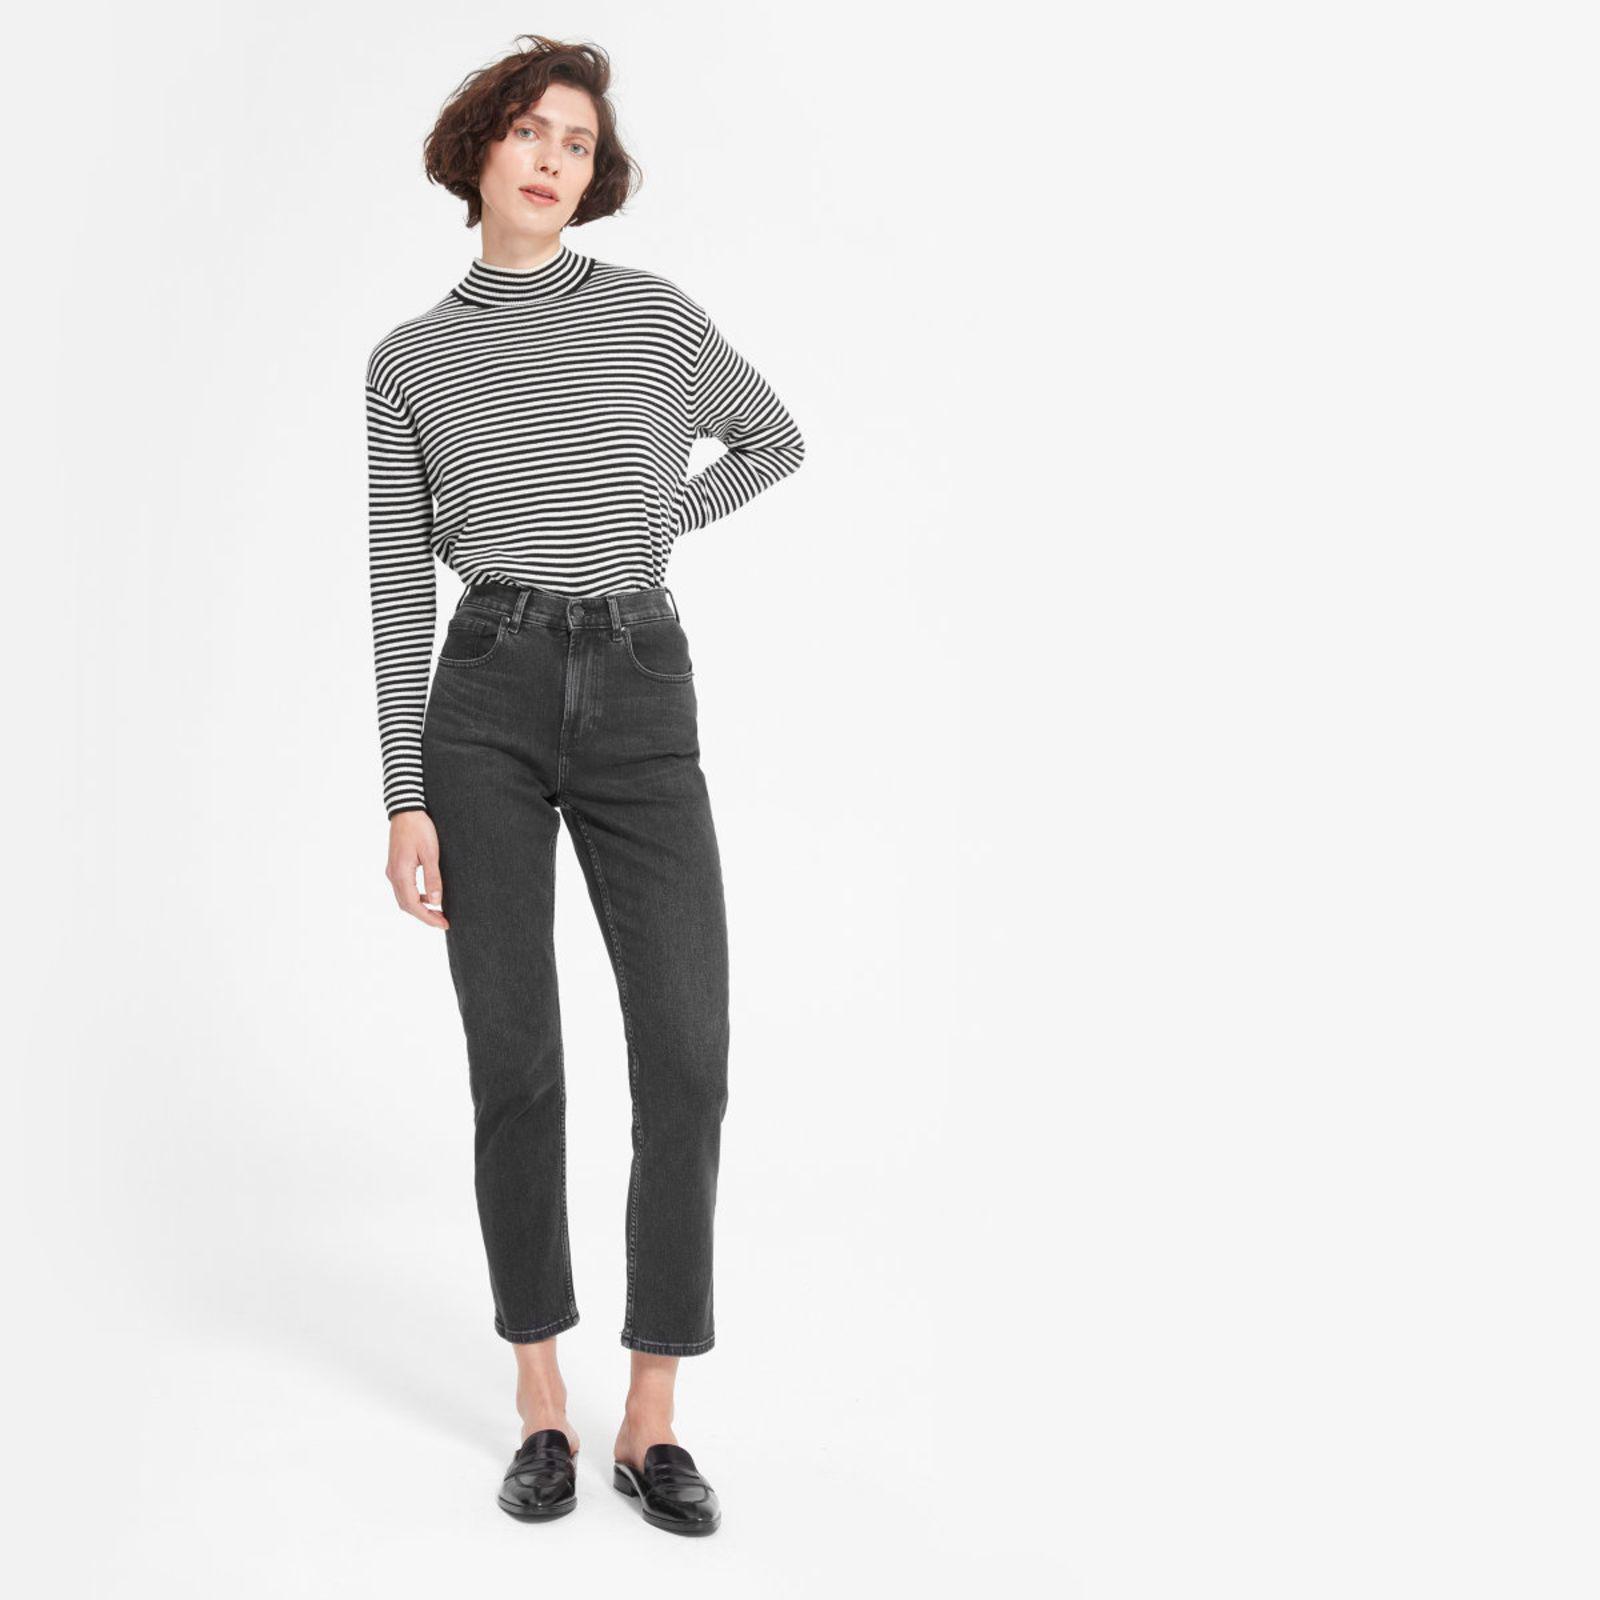 Lyst - Everlane The Cheeky Straight Jean in Black